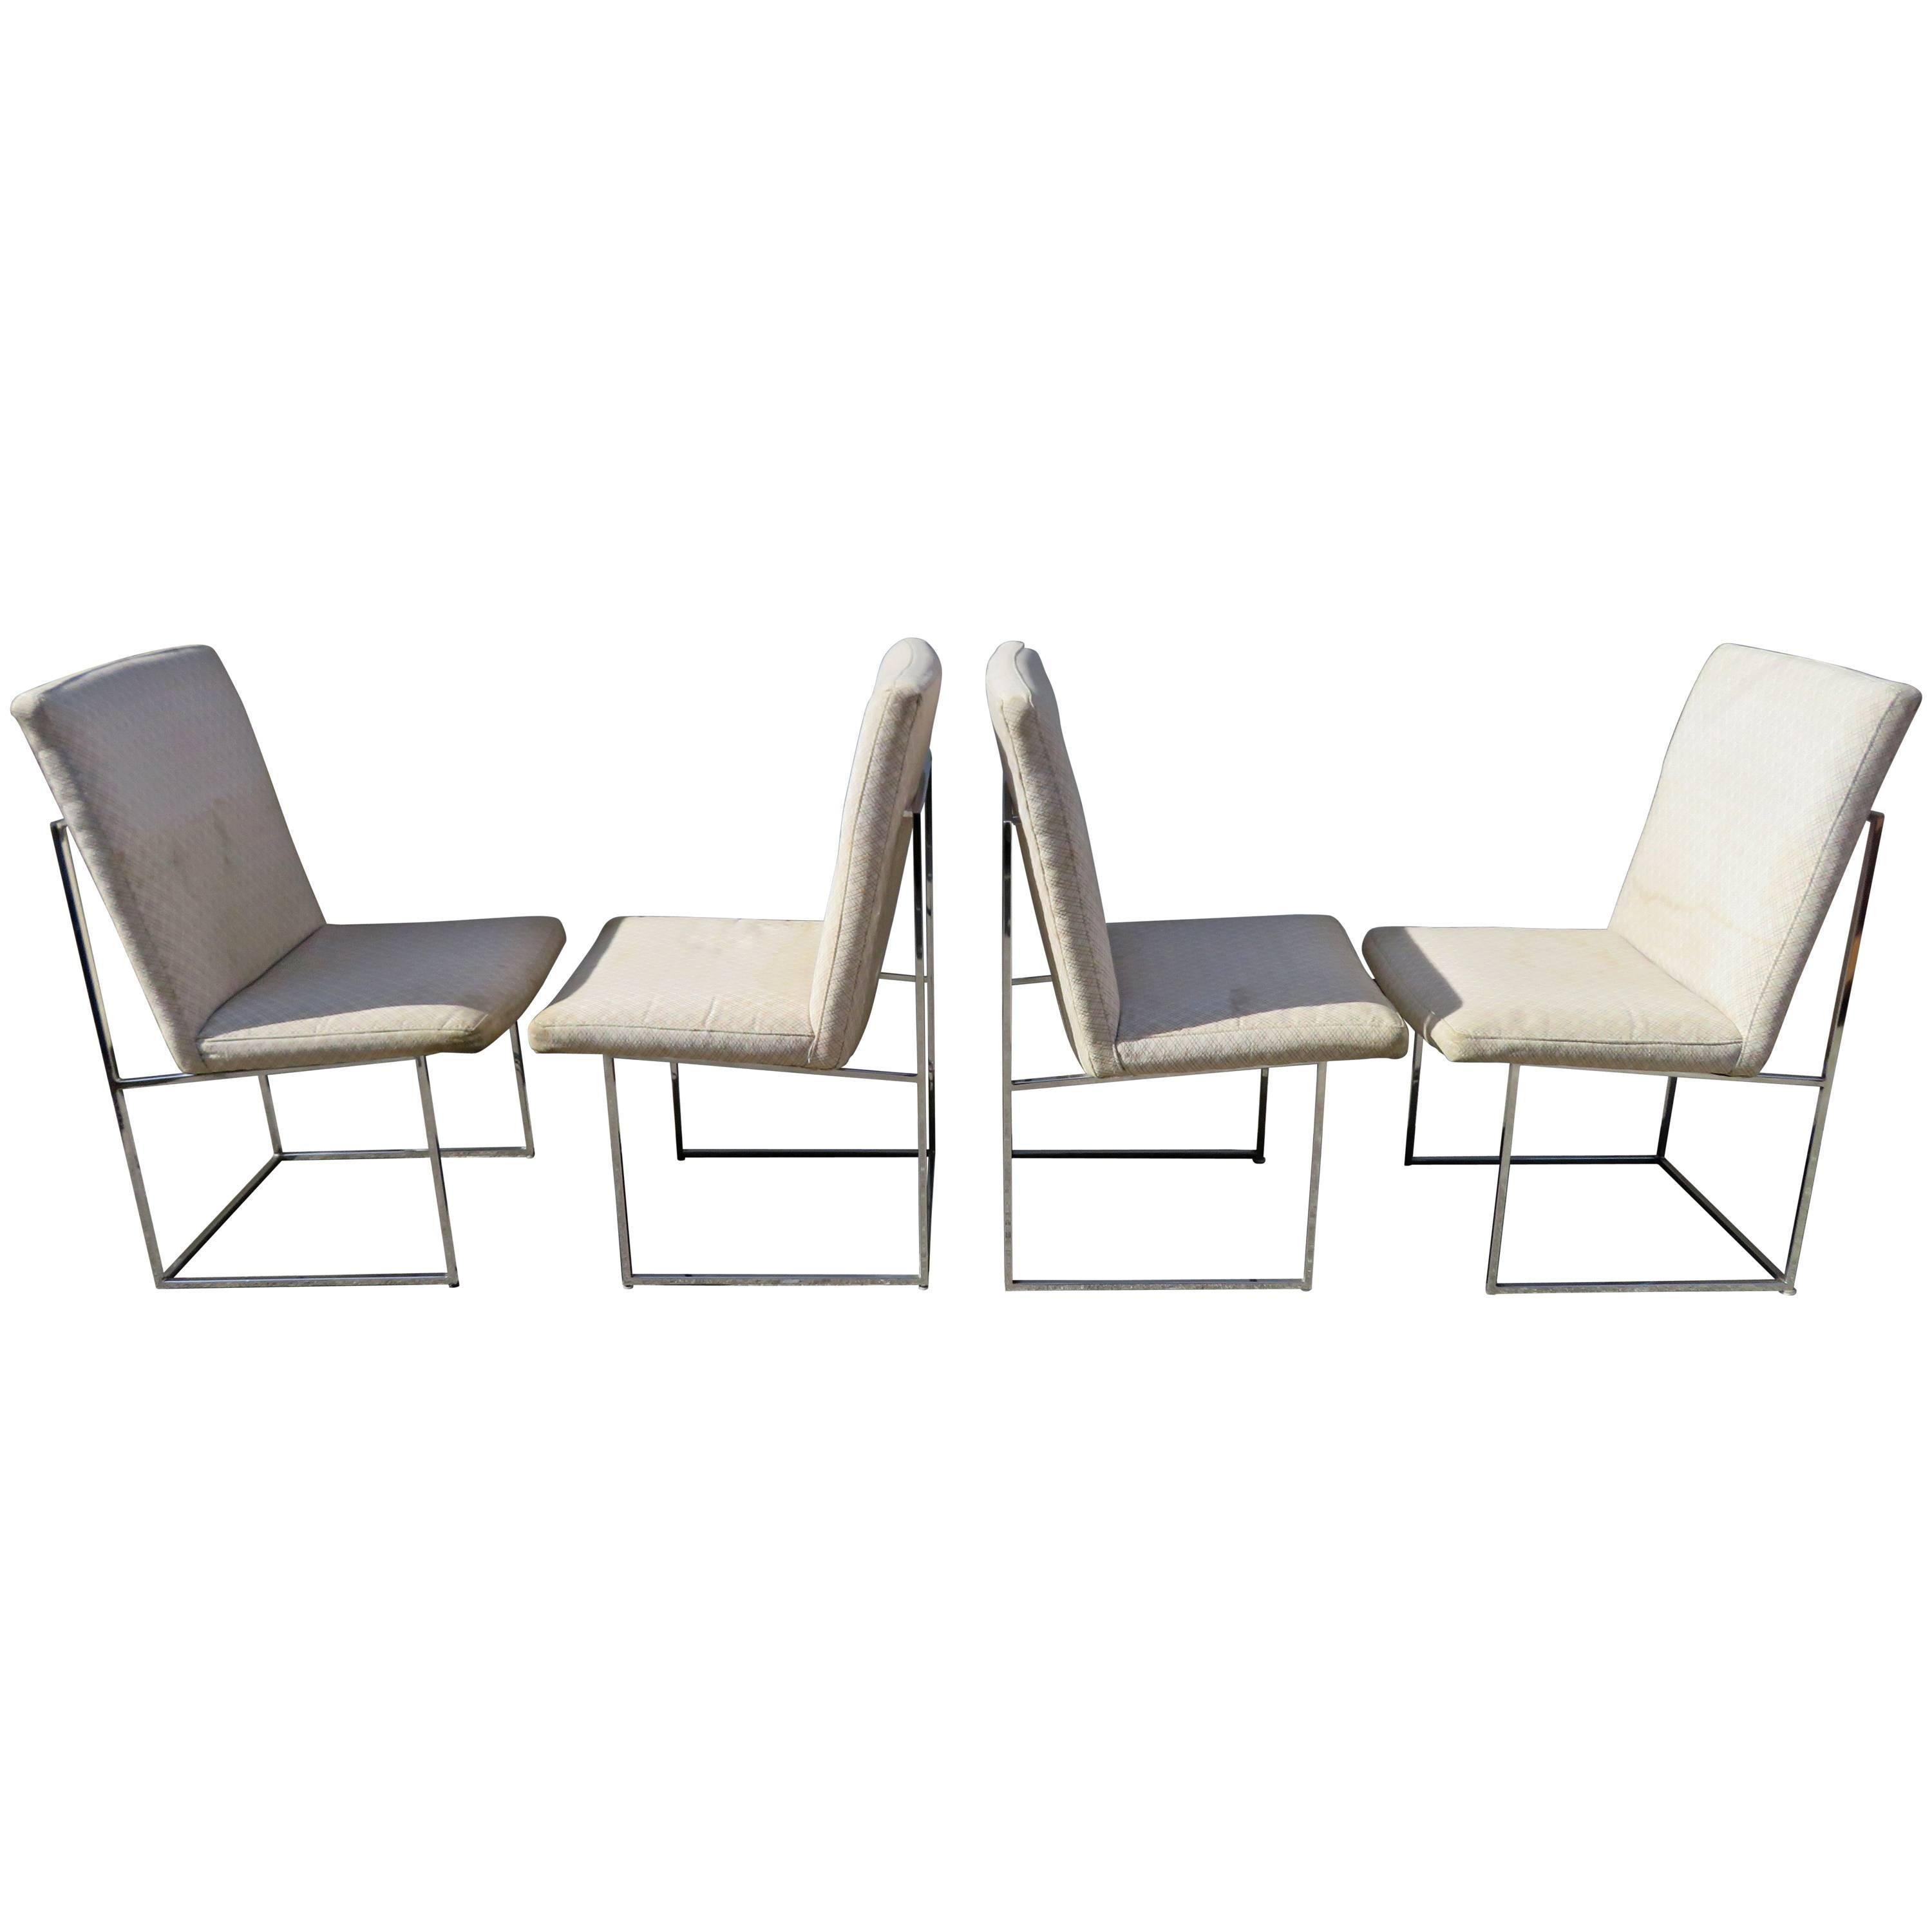 Set of Four Milo Baughman Chrome Cube Architectural Dining Chairs, Midcentury